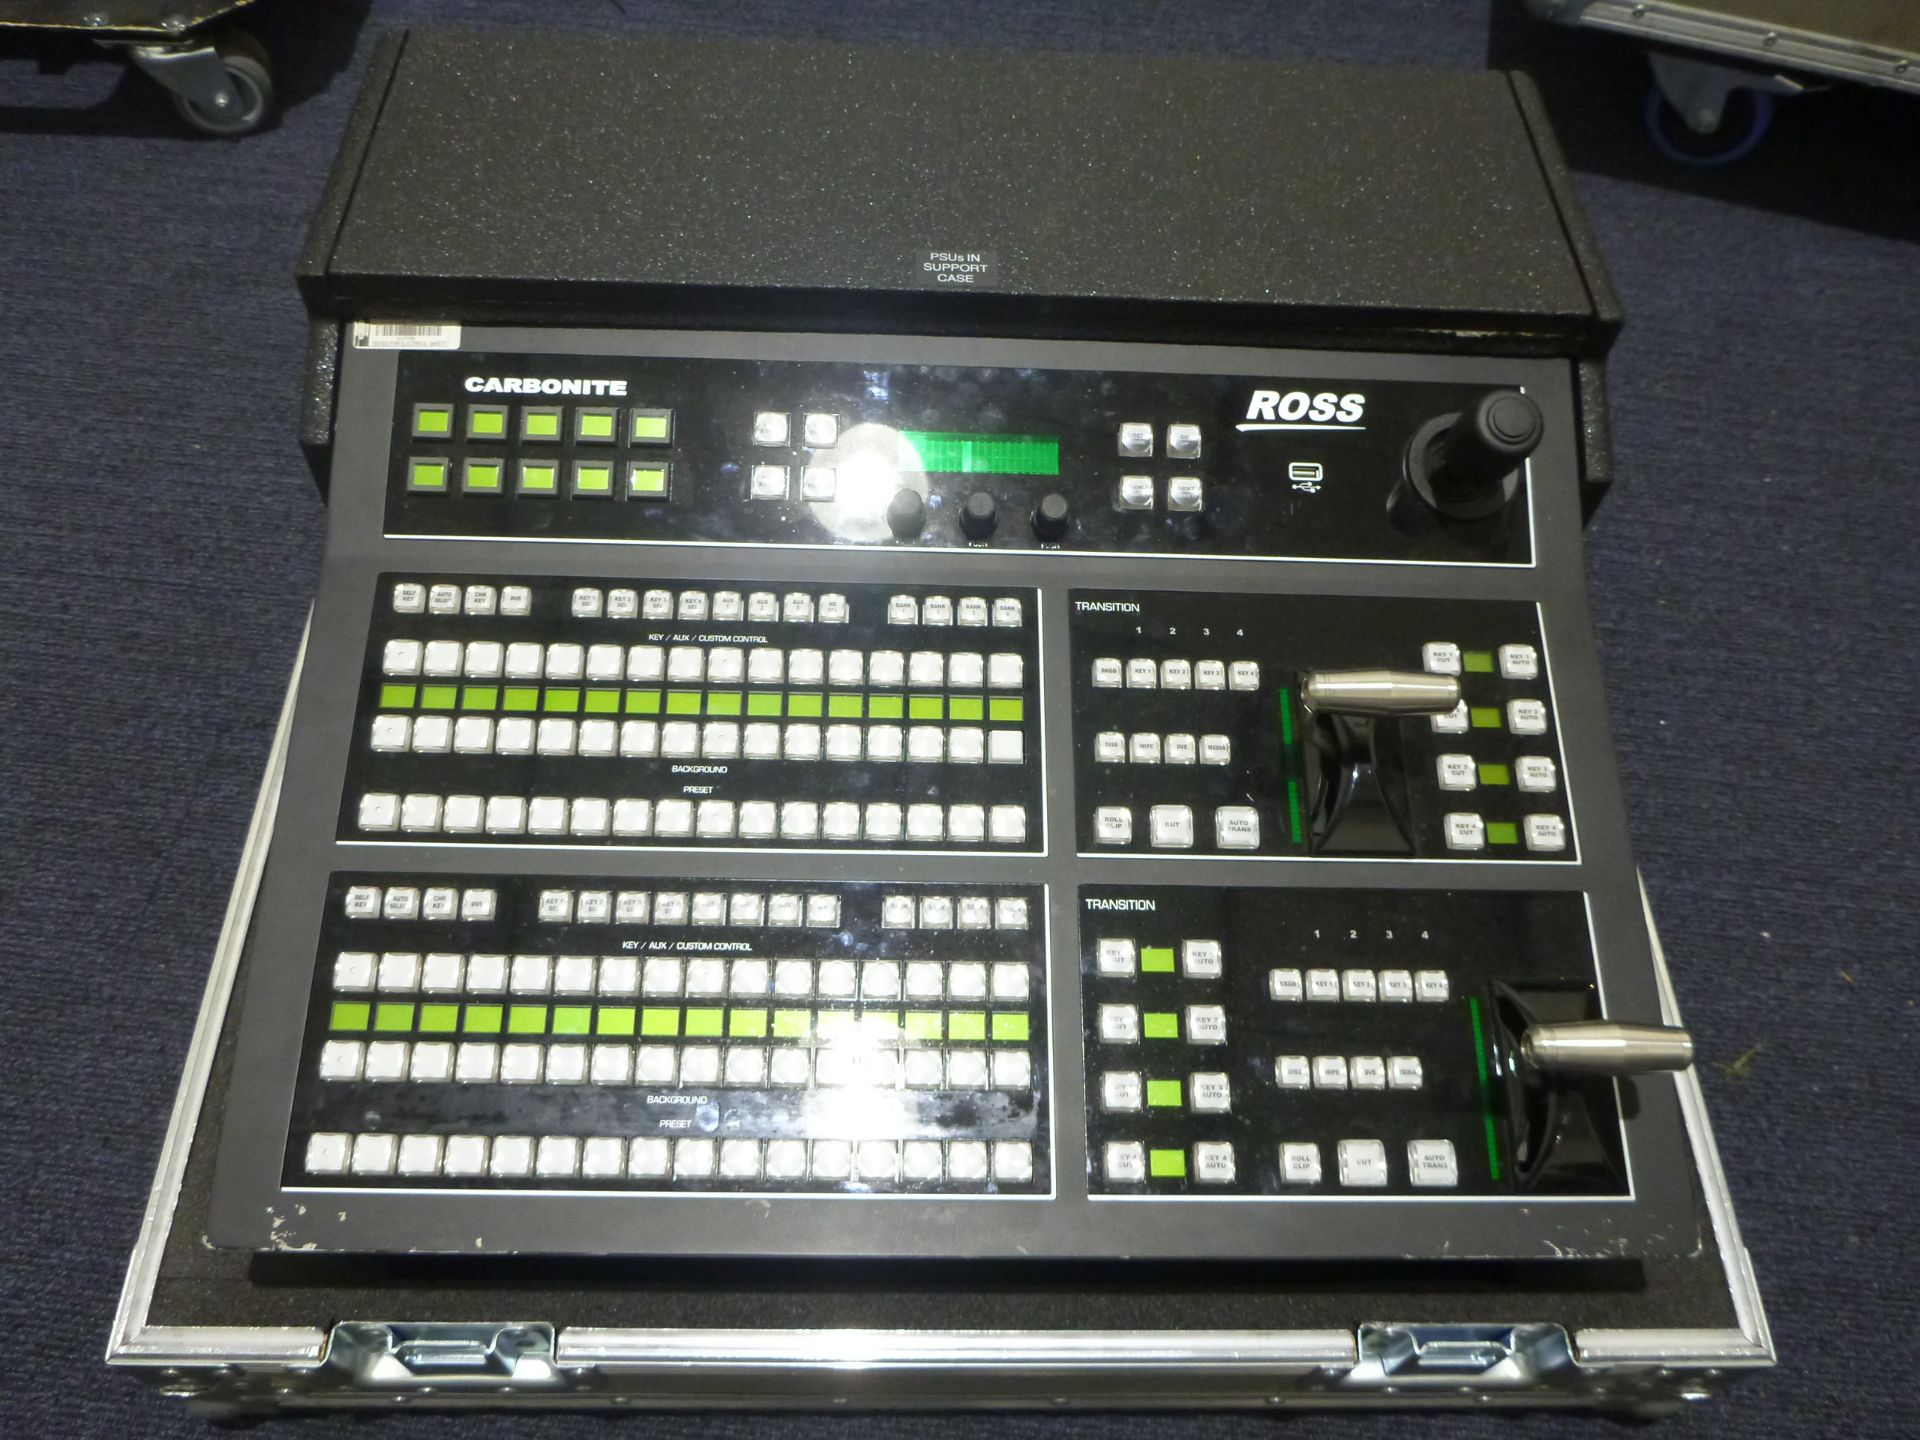 Portable Production Unit (PPU) To include Ross Carbonite Black 2 control desk, Ross SRG-4400 sync - Image 2 of 33